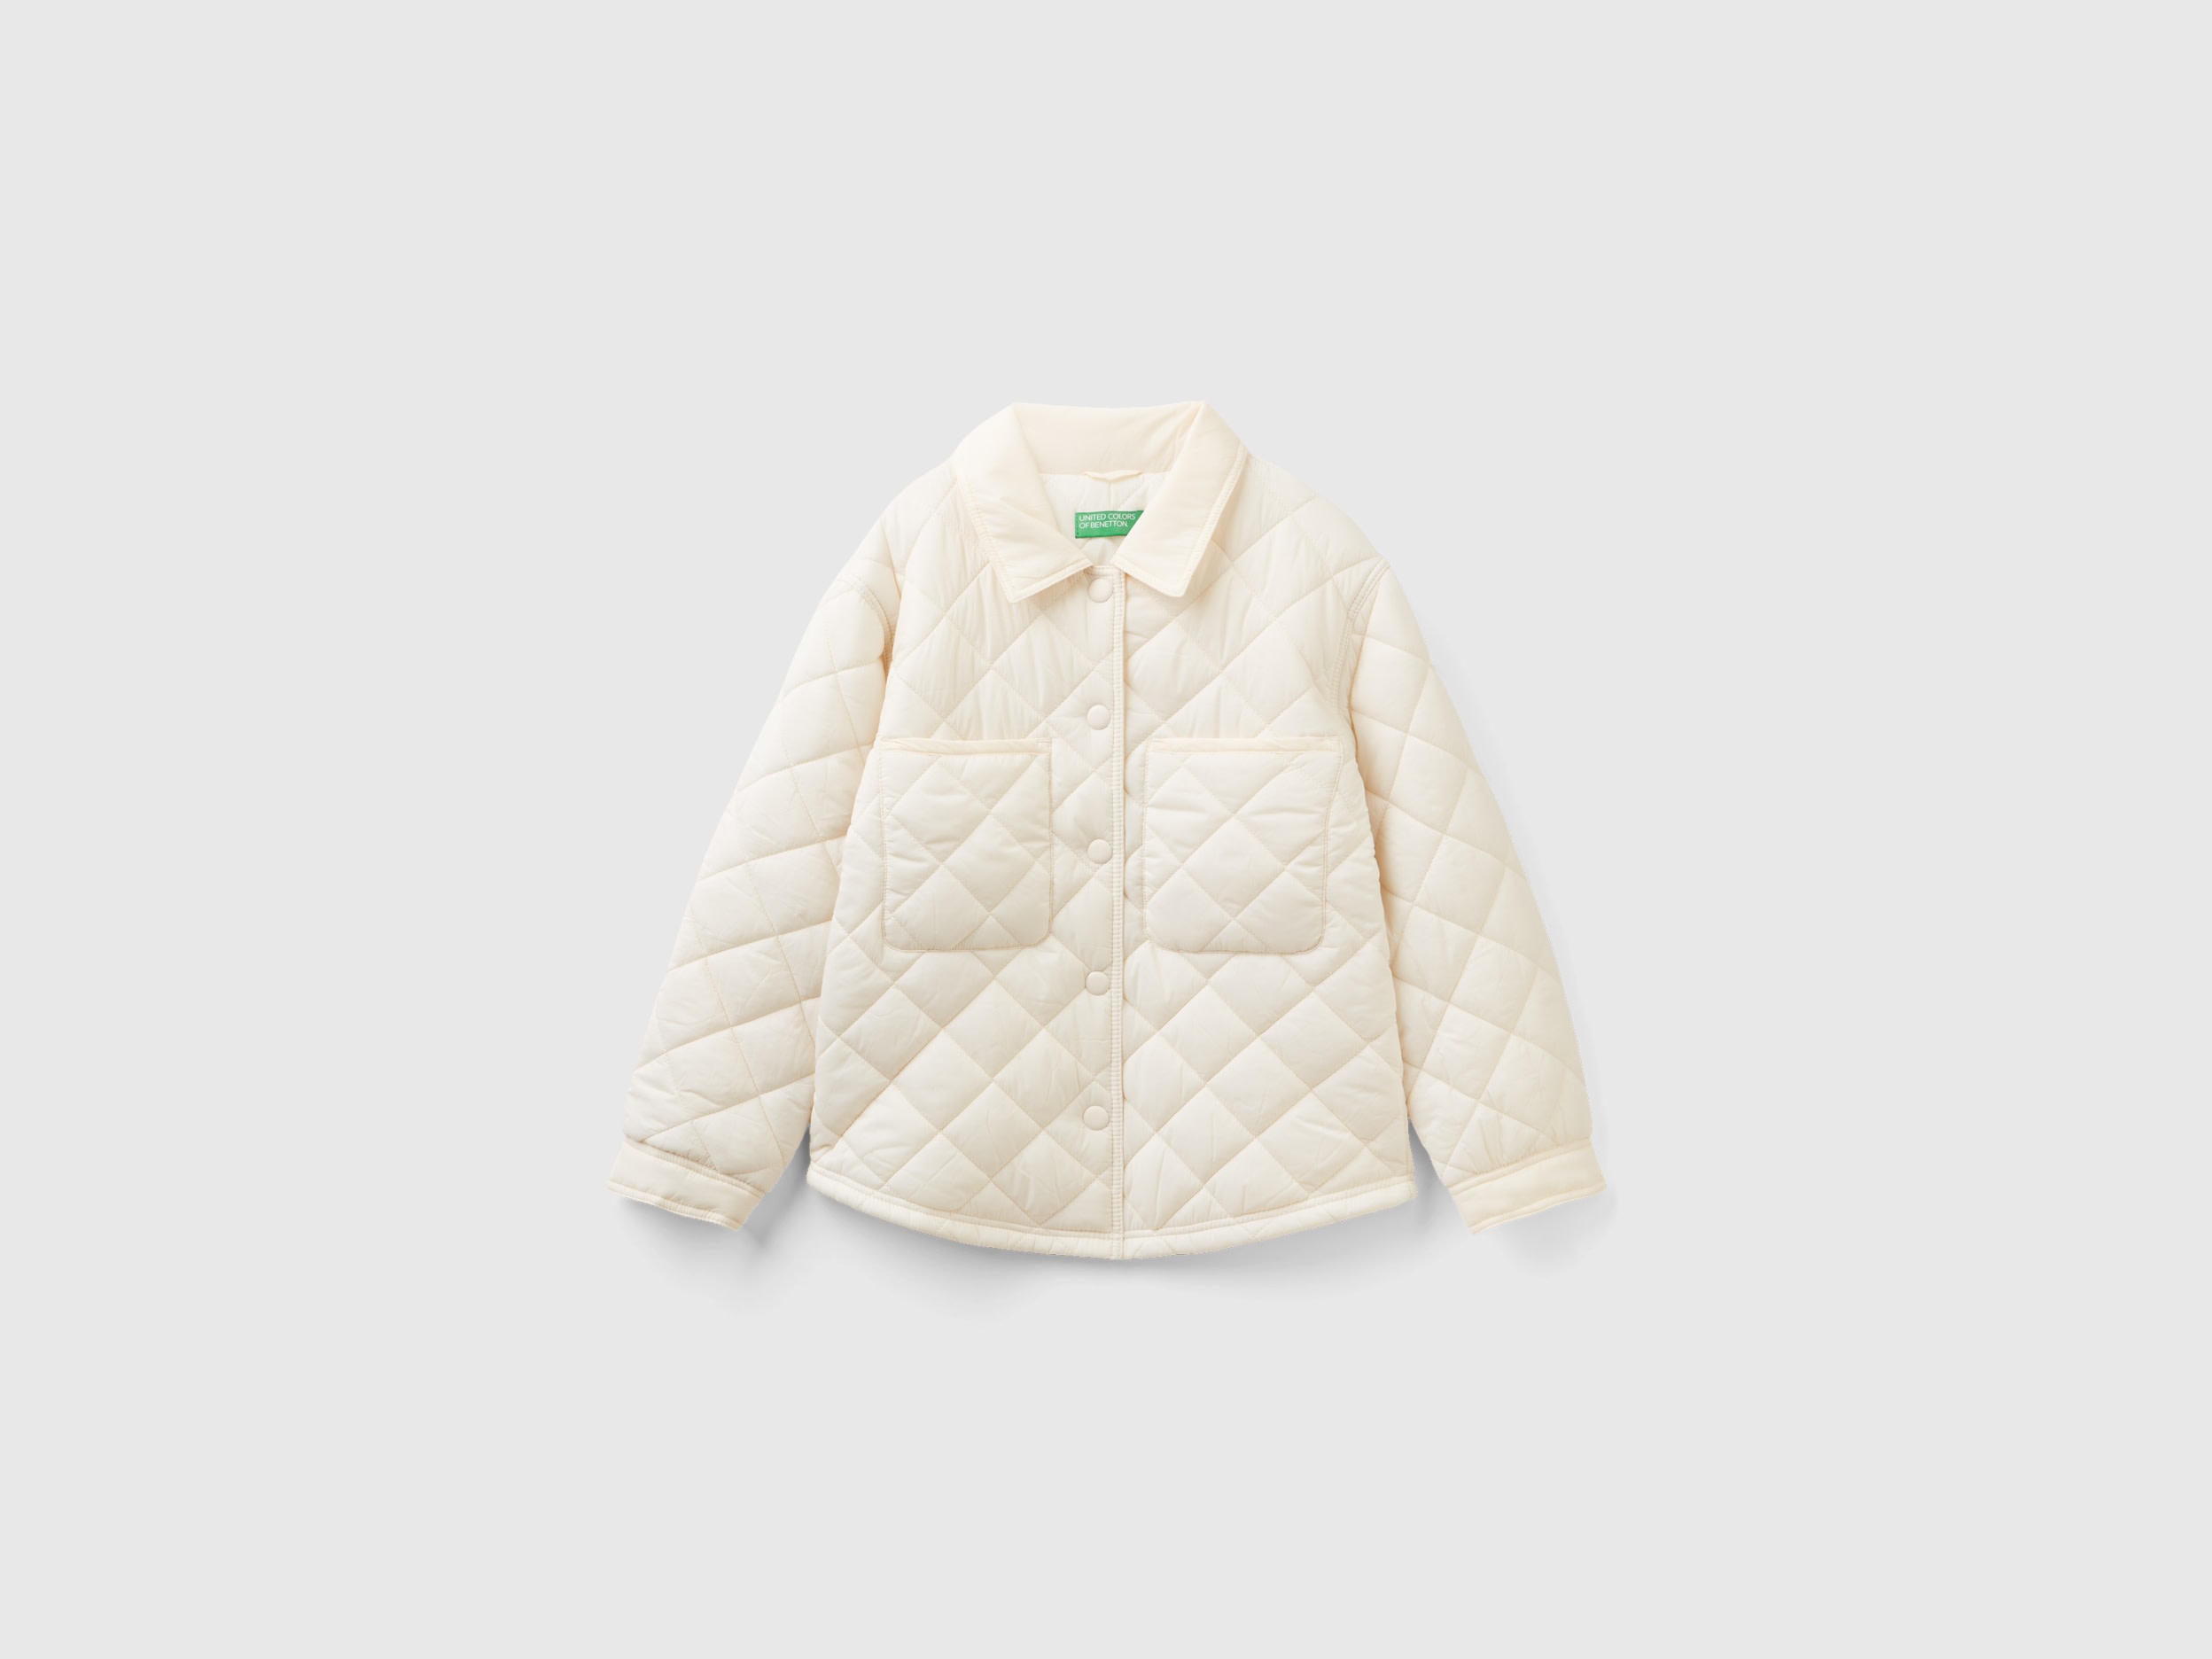 Benetton, Light Quilted Jacket, size XL, Creamy White, Kids